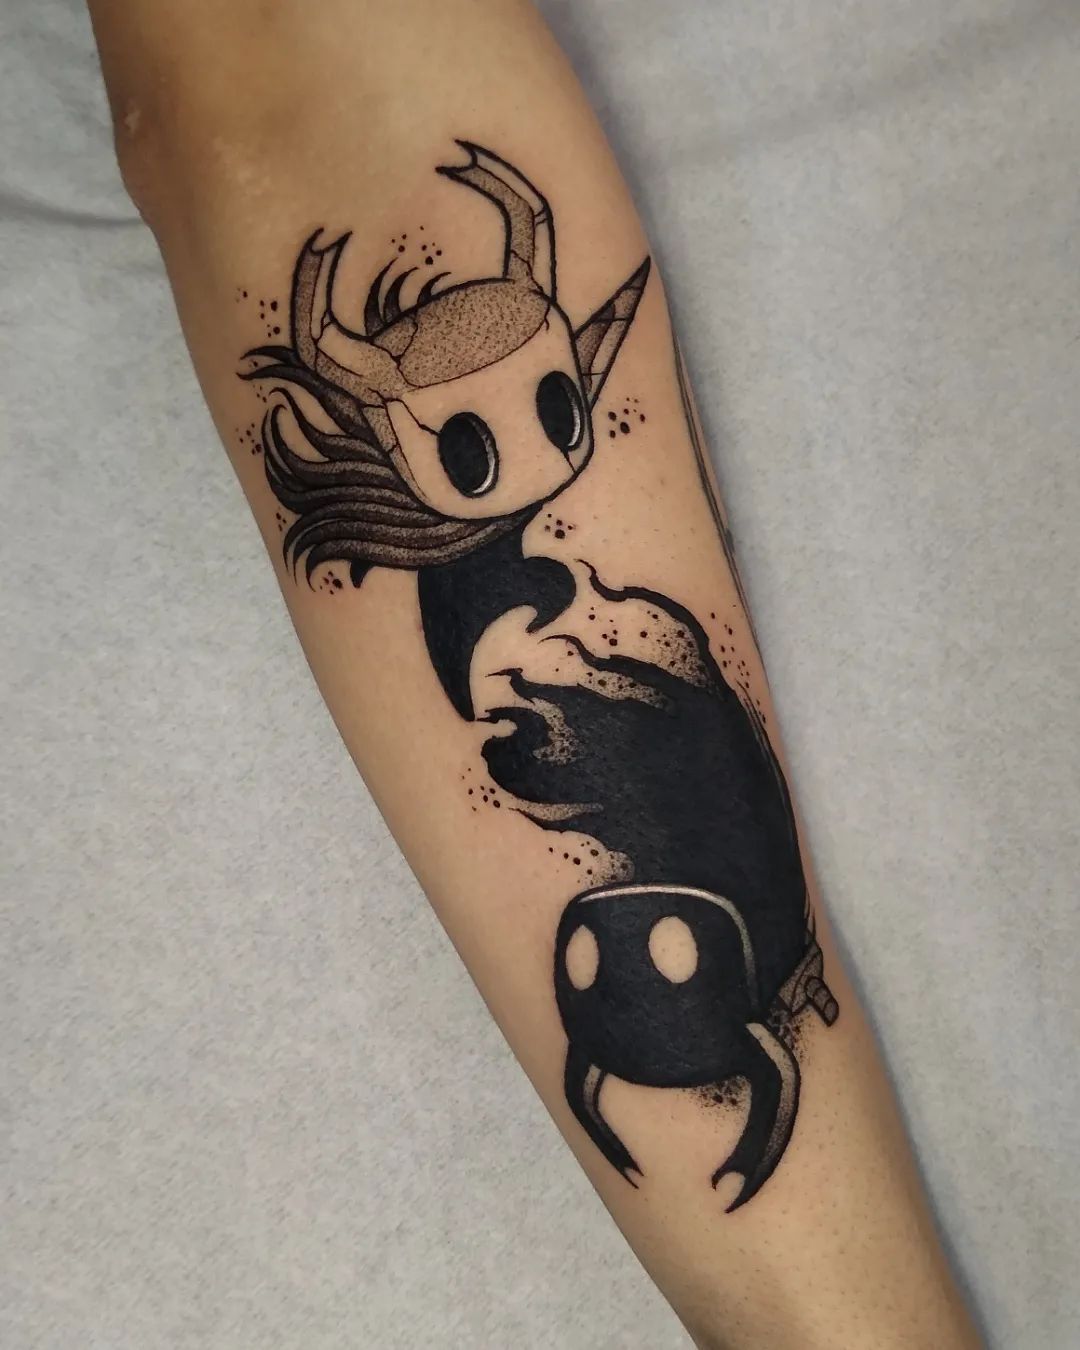 51 Hollow Knight Tattoos to Adore Before Silksong